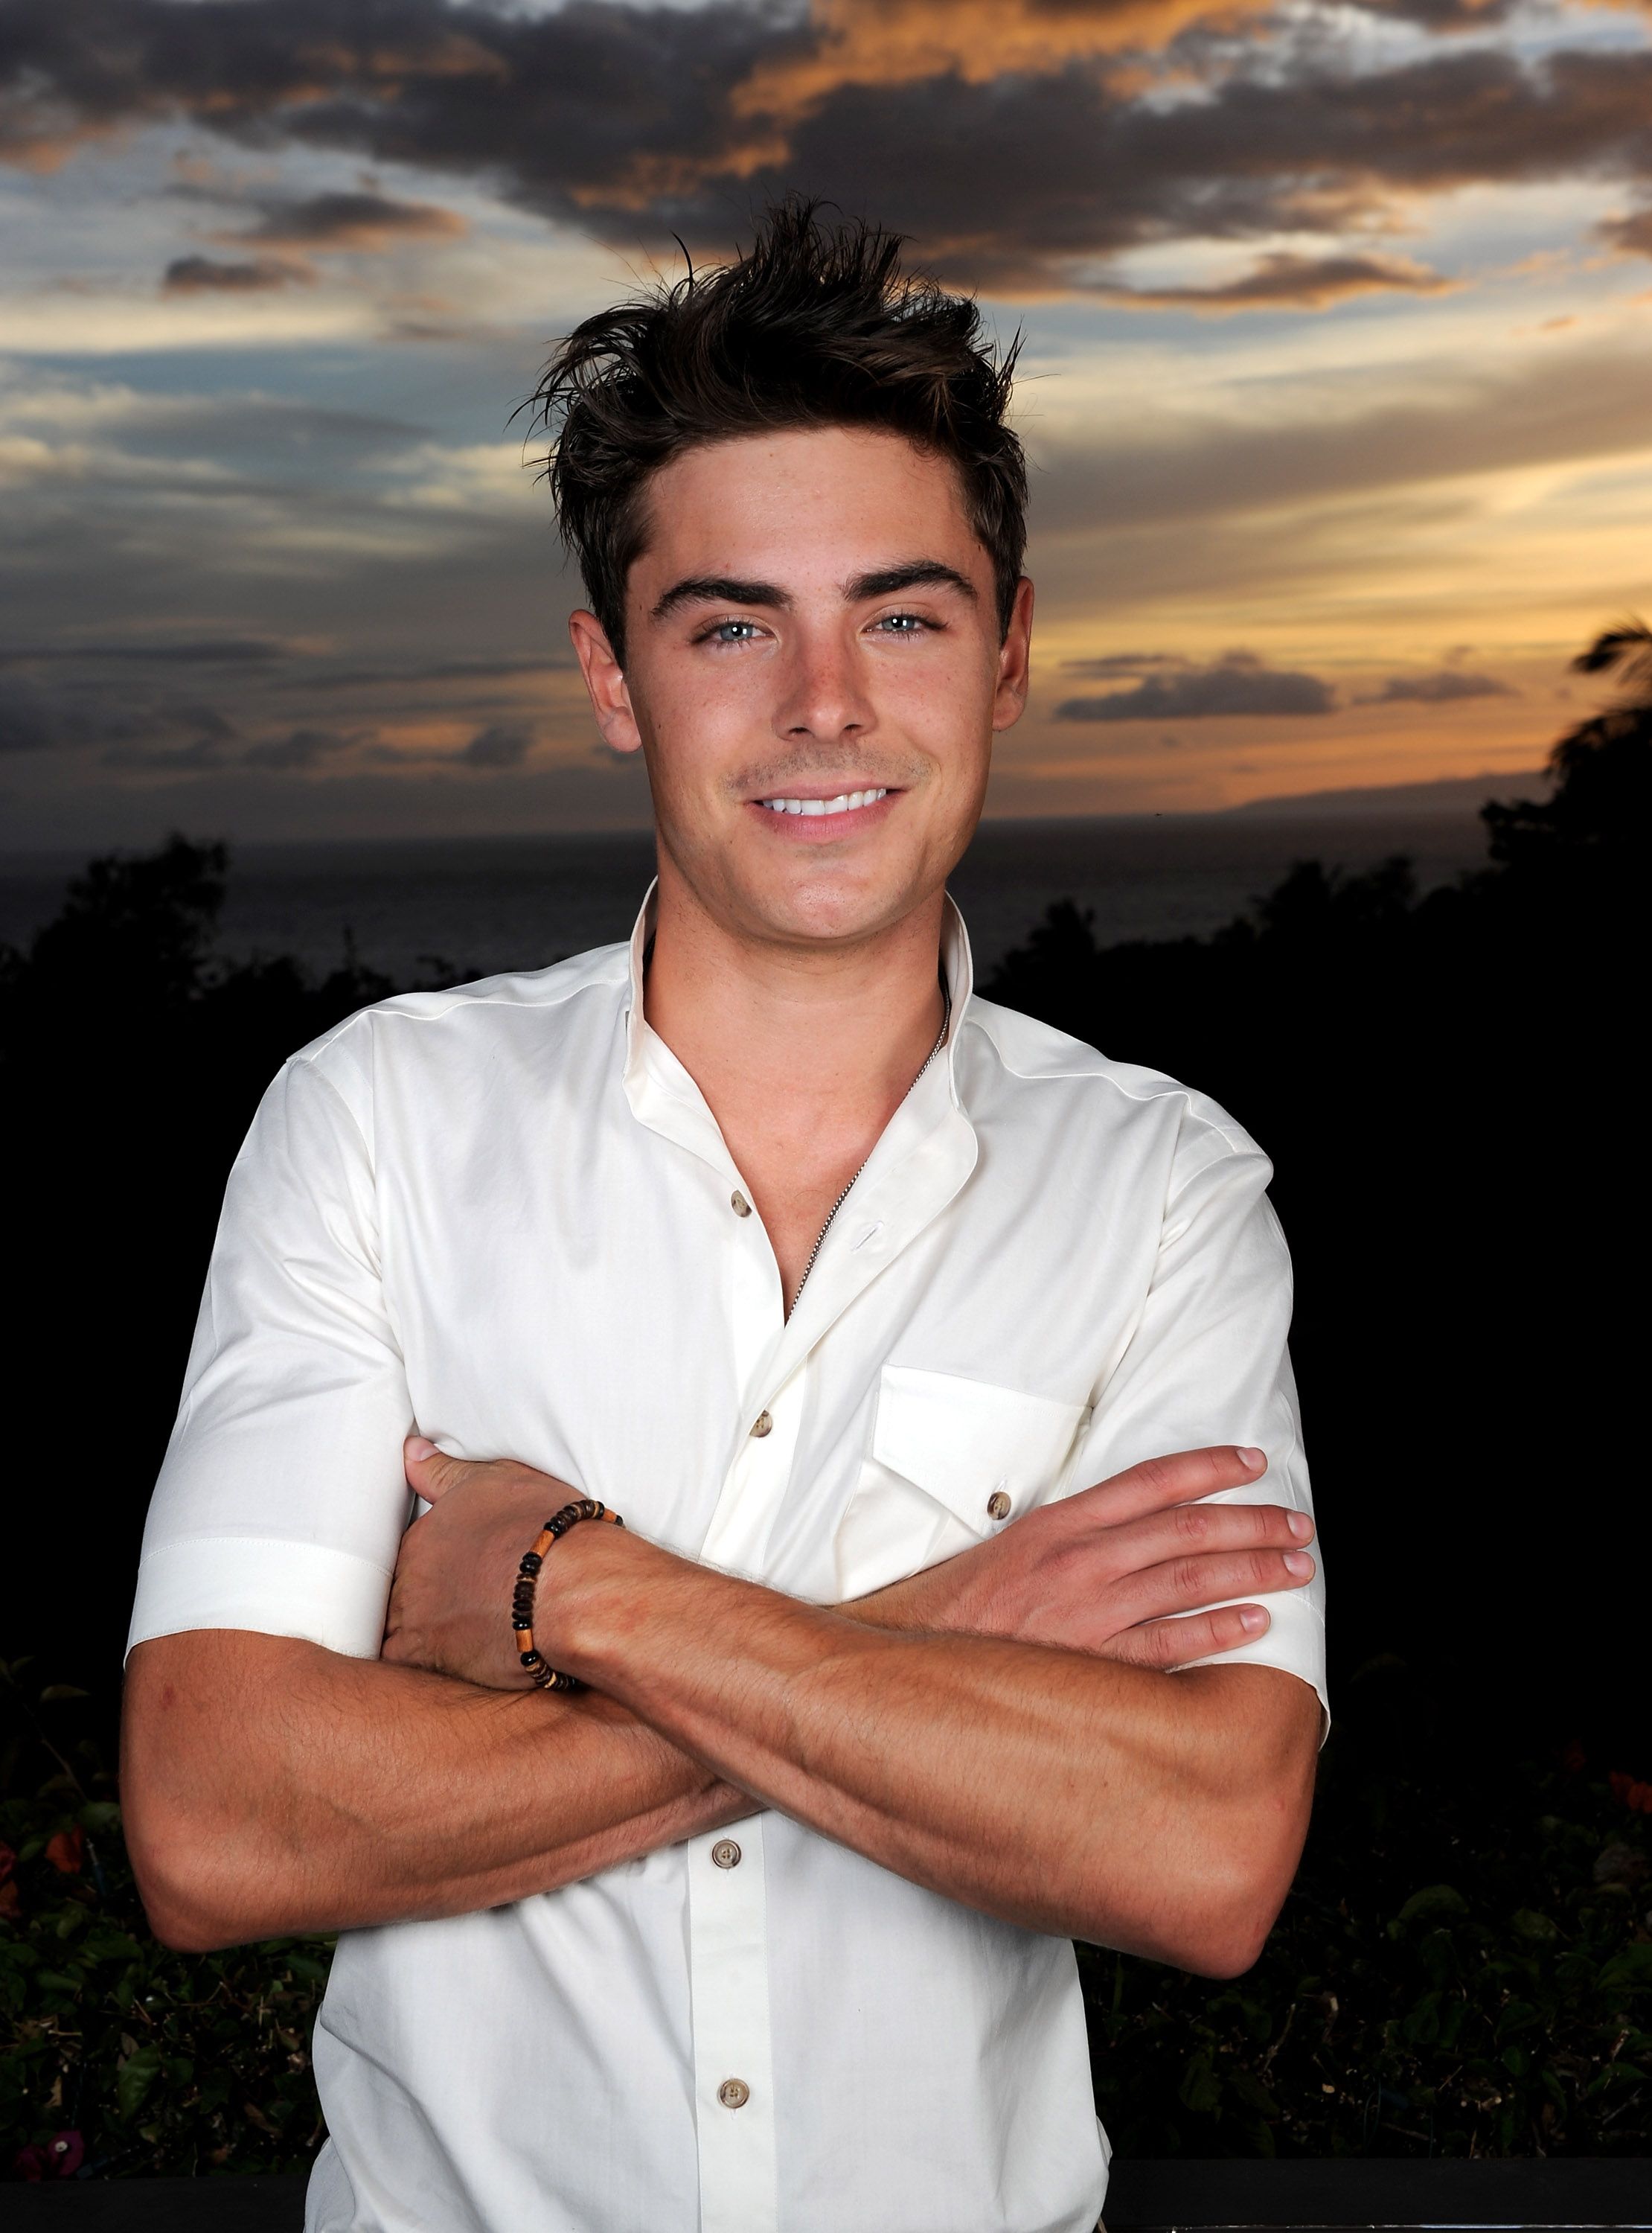 WAILEA, HI - JUNE 16: Actor Zac Efron poses for a portait for the Shining Star Award at the 2010 Maui Film Festival at the Celestial Cinema on June 16, 2010 in Wailea, Hawaii. (Photo by Michael Buckner/Getty Images for Maui Film Festival)